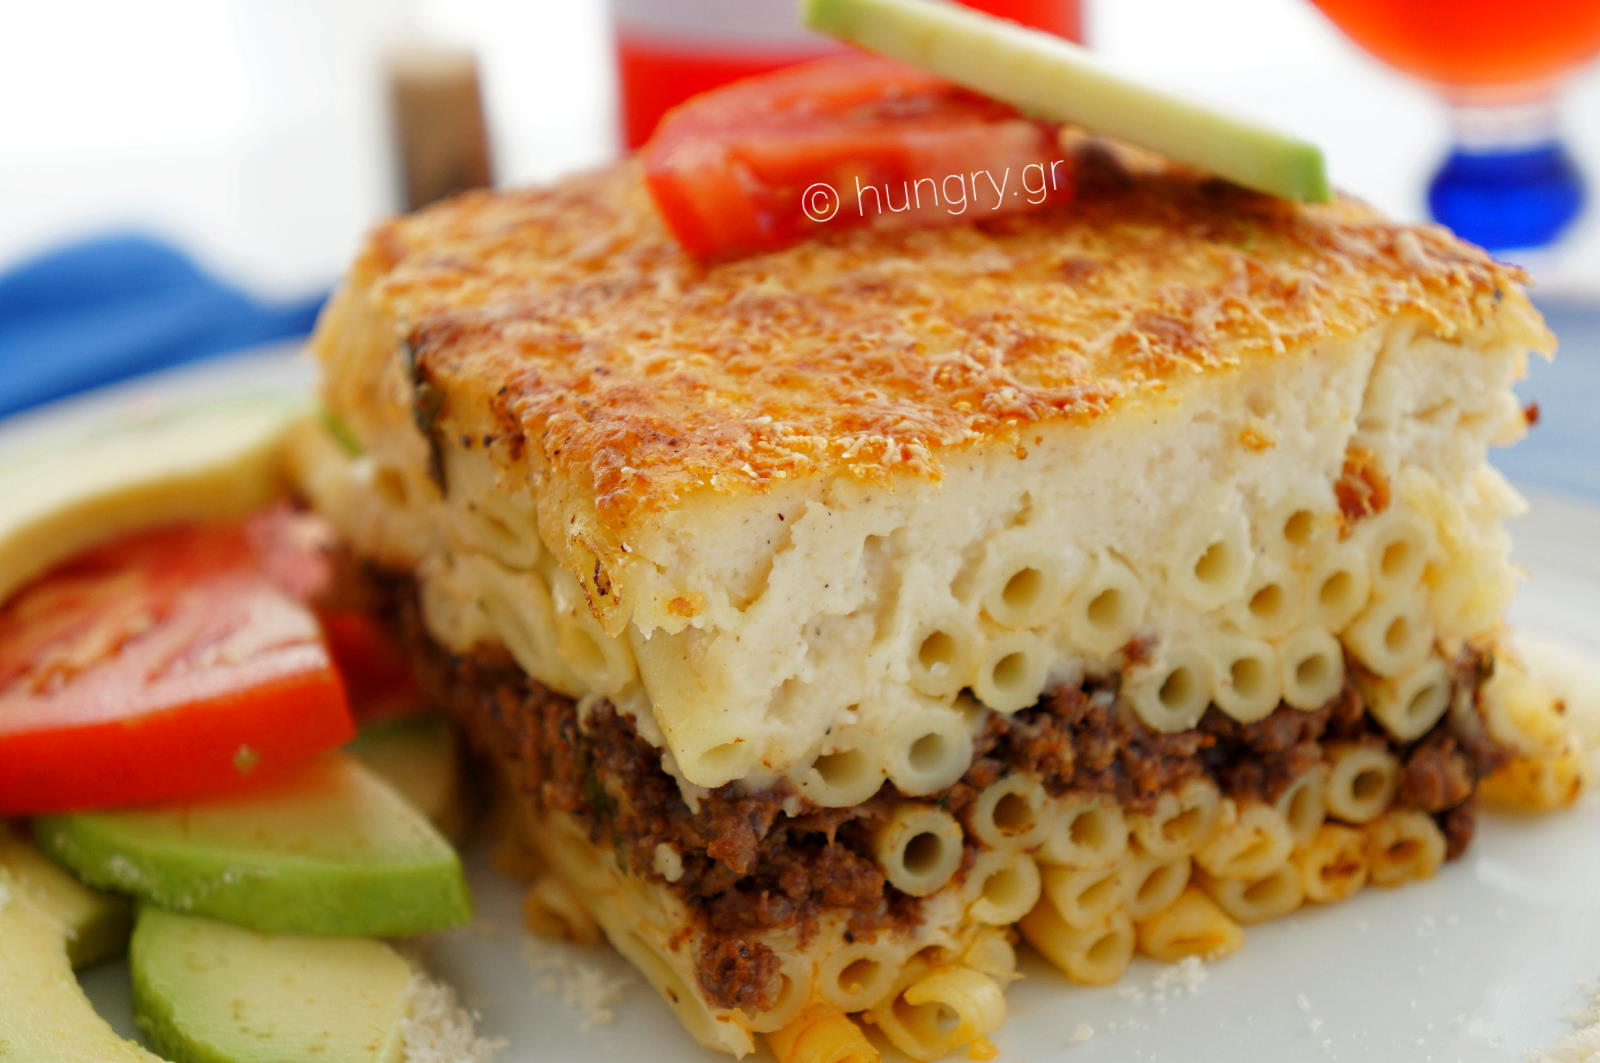 Kitchen Stories: Greek Pastitsio-Baked Greek Bucatini with Meat